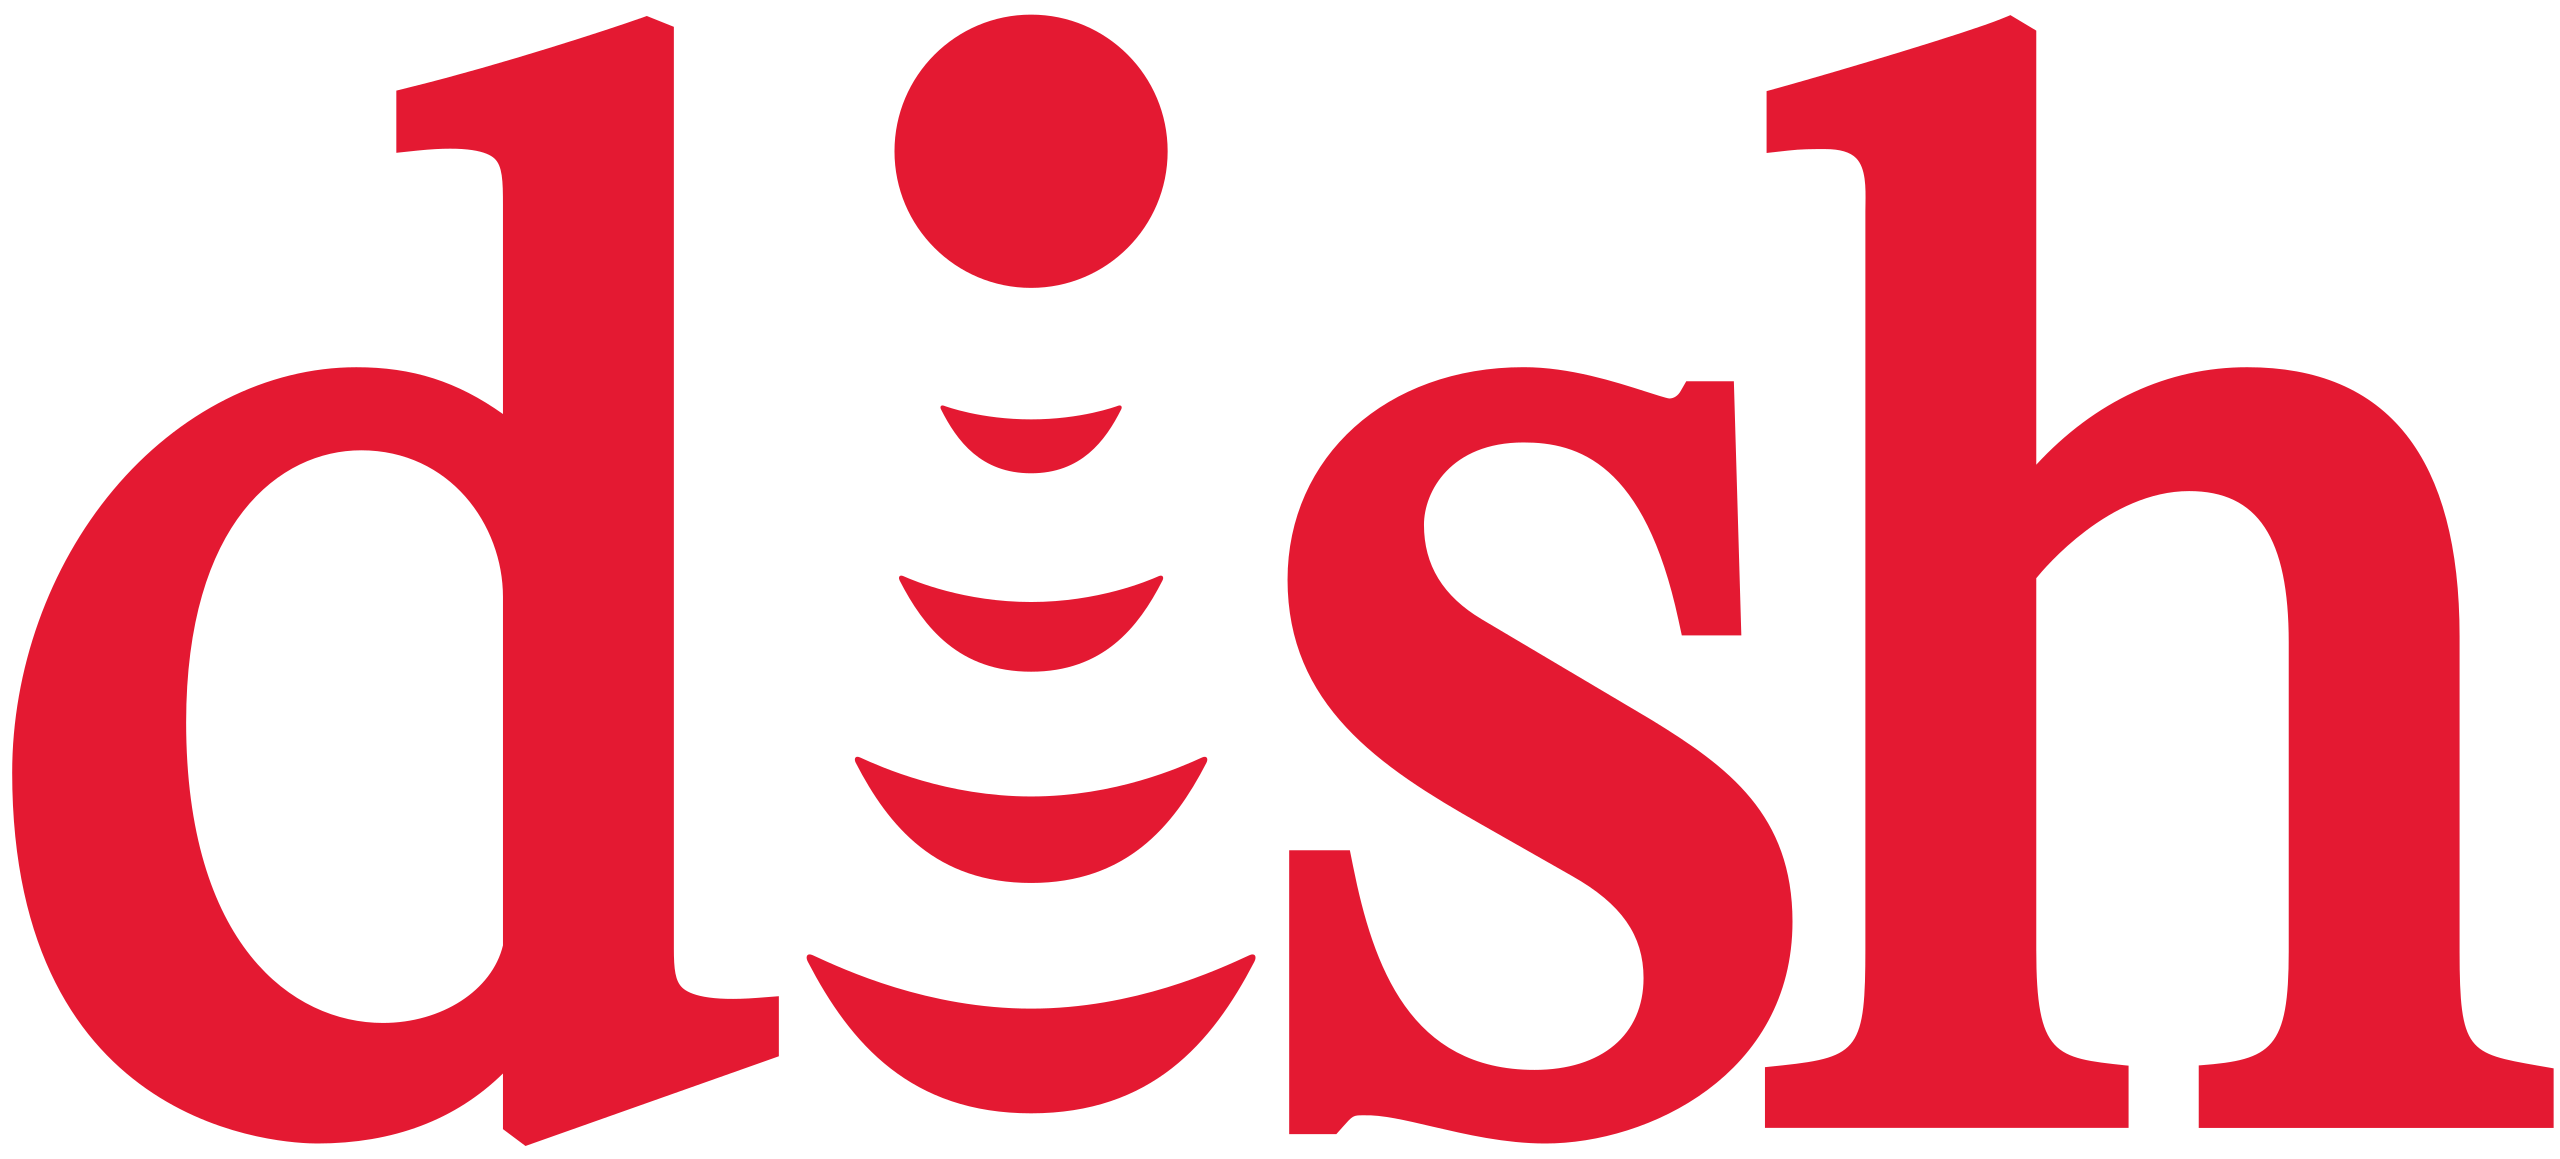 DISH Network has filed a recent patent with the goal of disrupting illegal IPTV services.